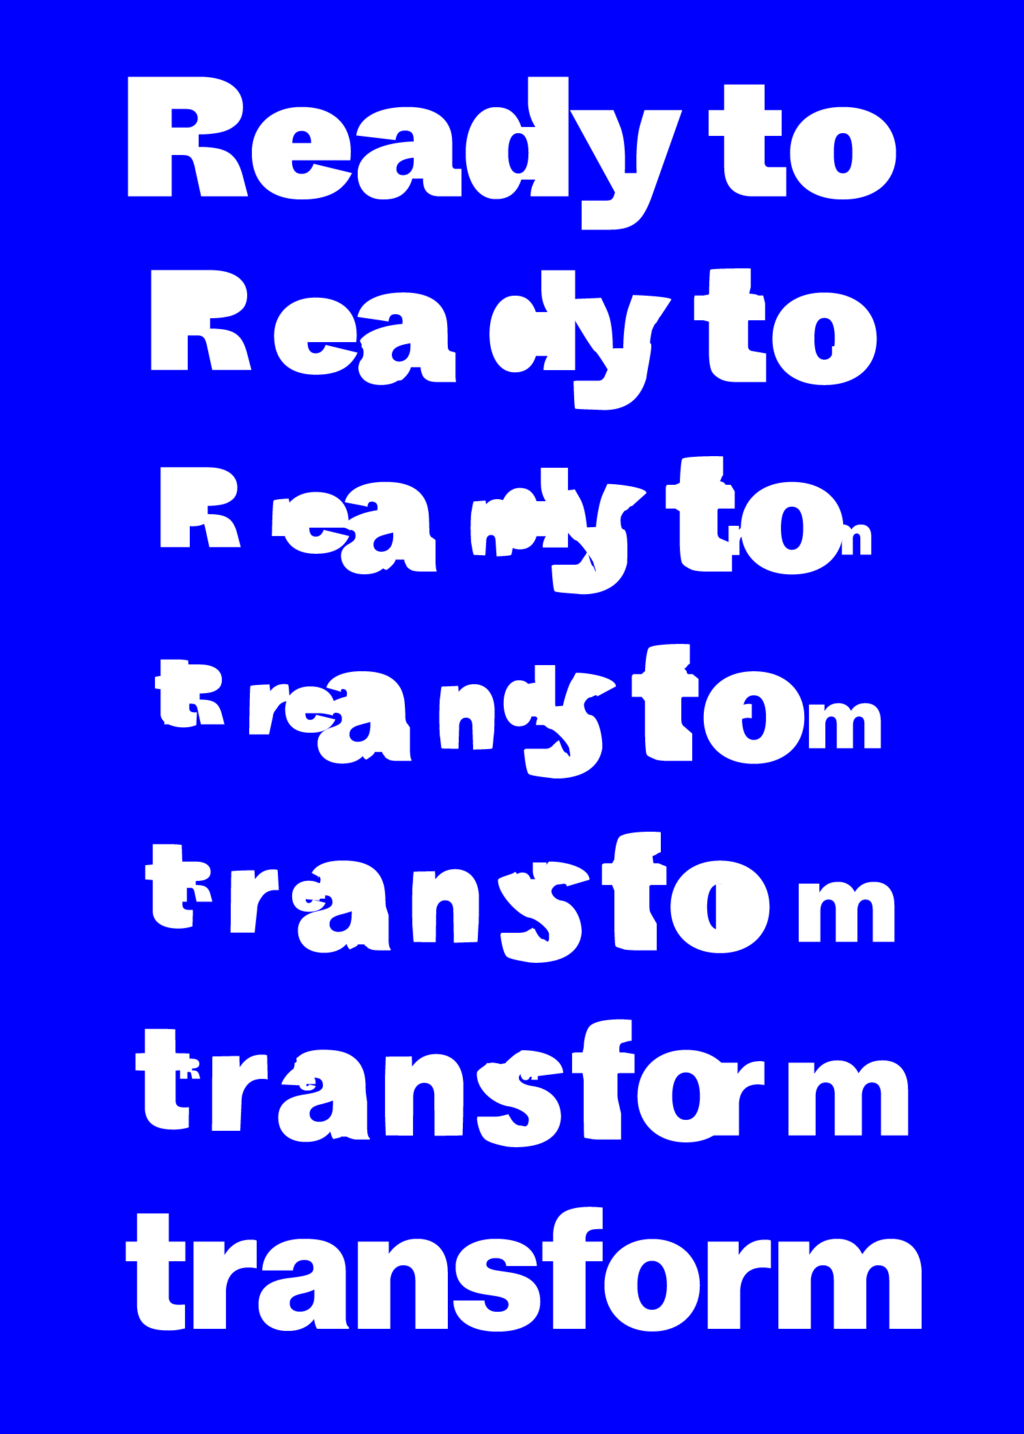 "Ready to" and "transform" with the blend tool making a morph in-between them